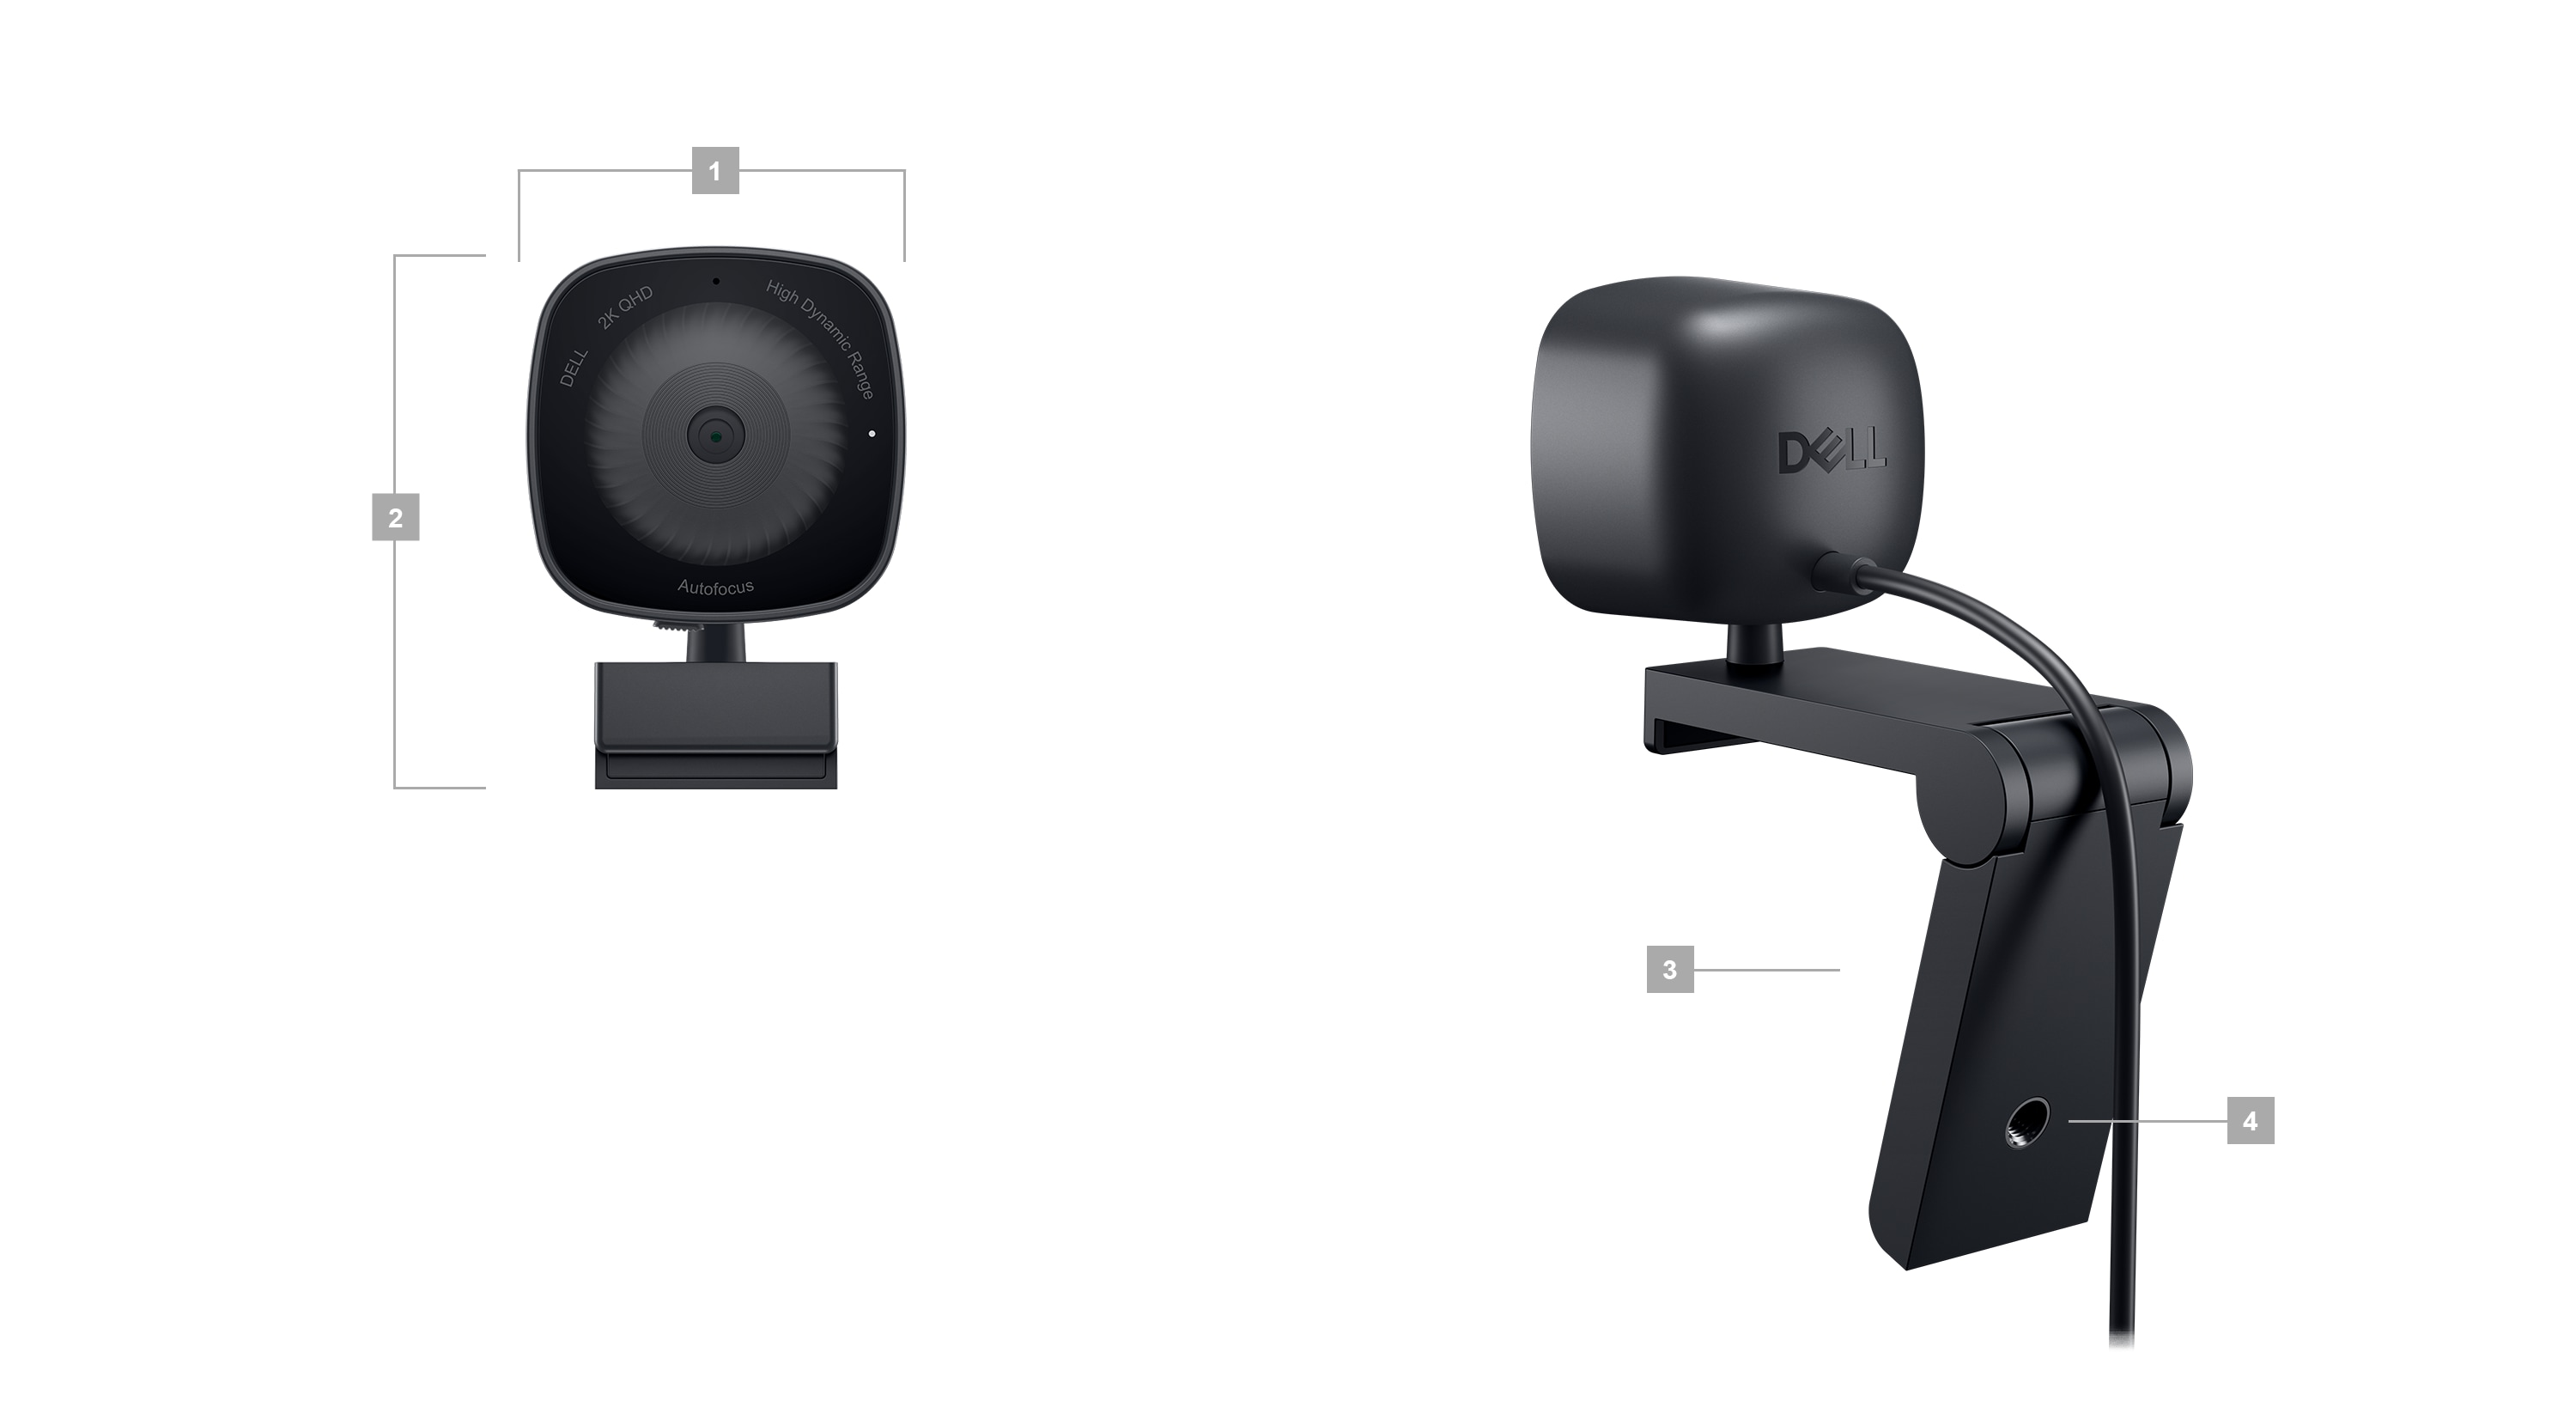 Dell WB3023 Webcams with numbers from 1 to 3 showing the product dimensions and features. 